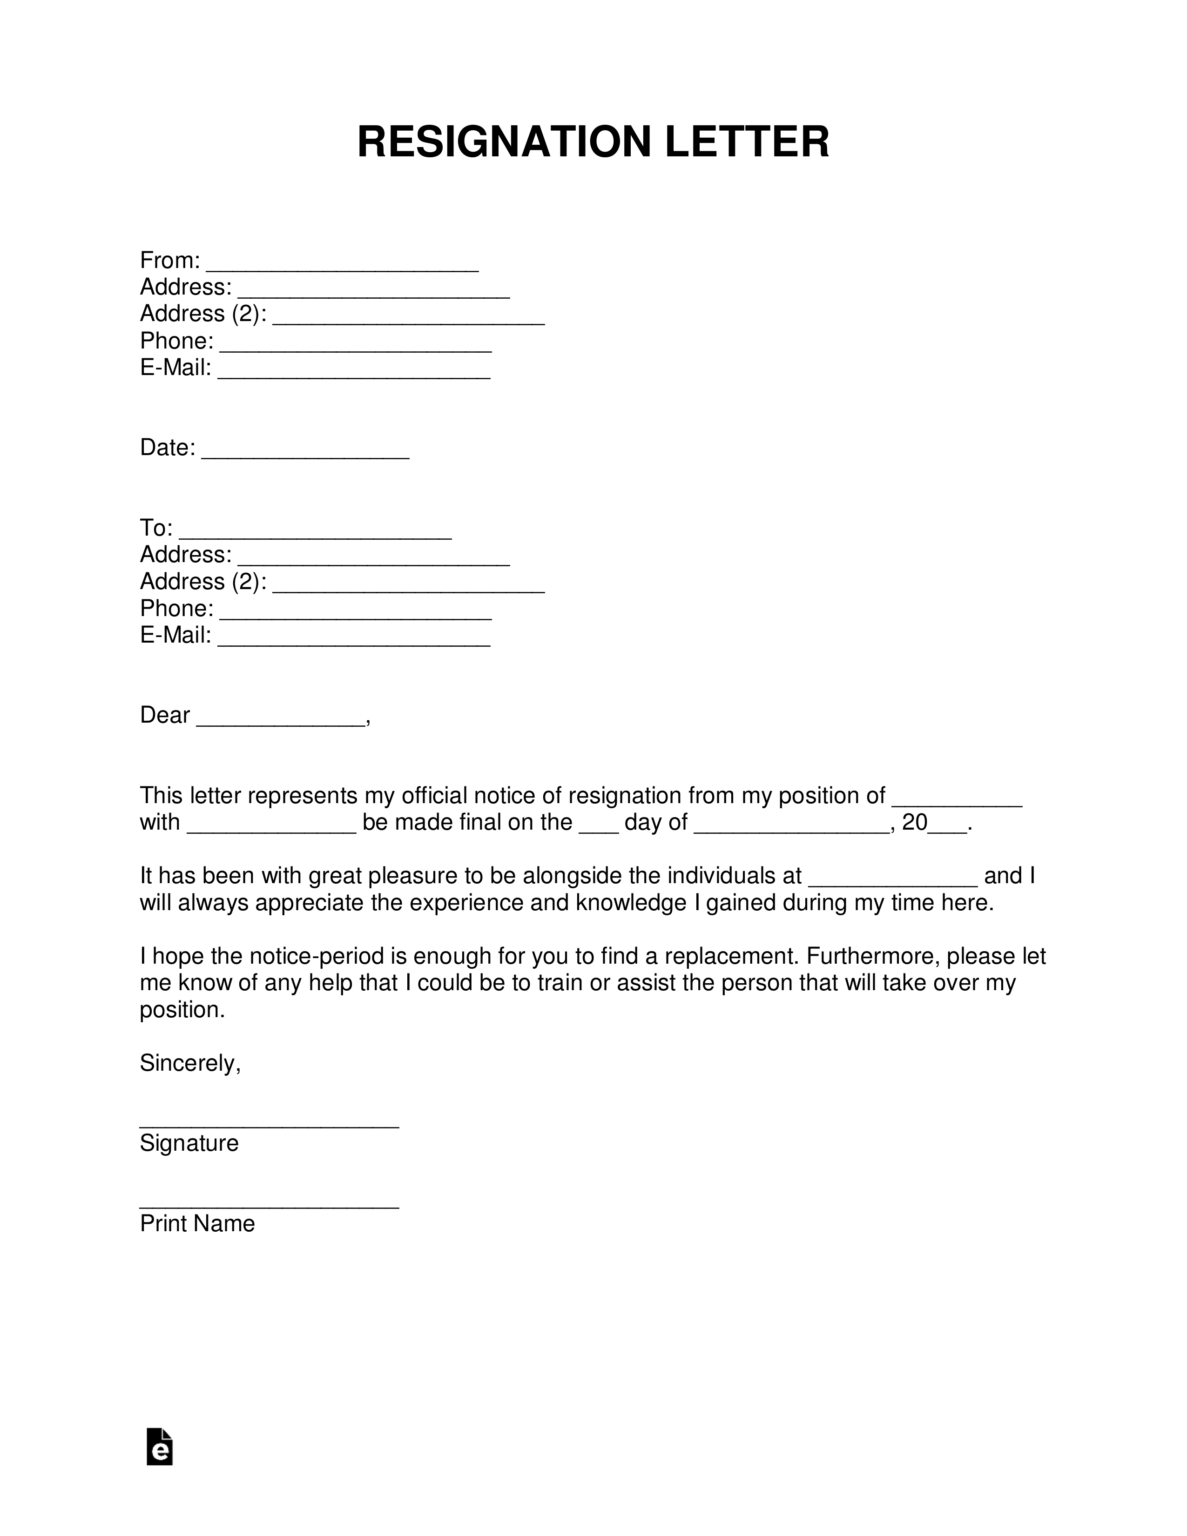 Free downloadable templates for personal resignation